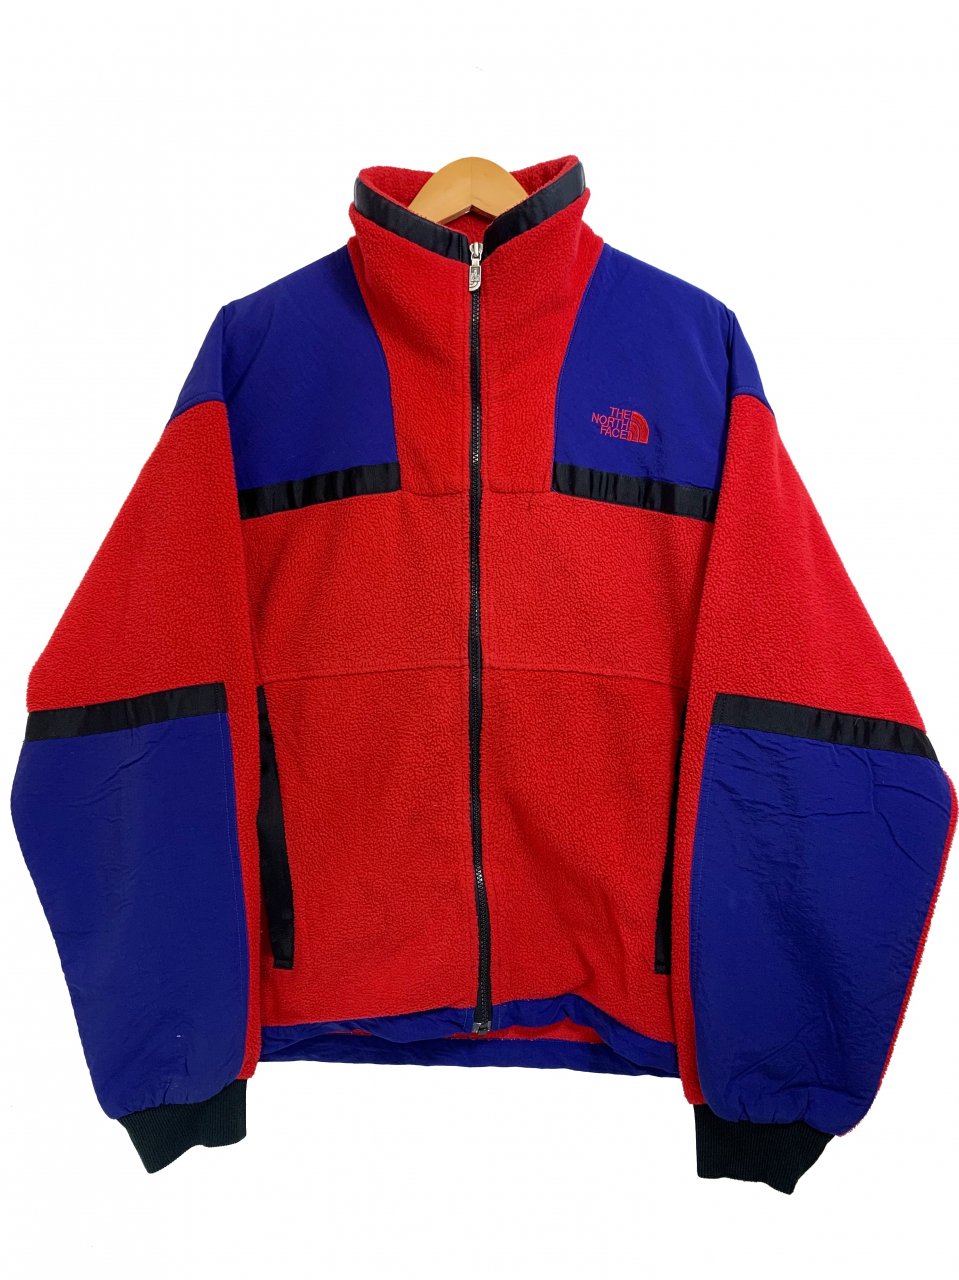 USA製 90s THE NORTH FACE Zip-Up Fleece Jacket 赤青 L ノース ...